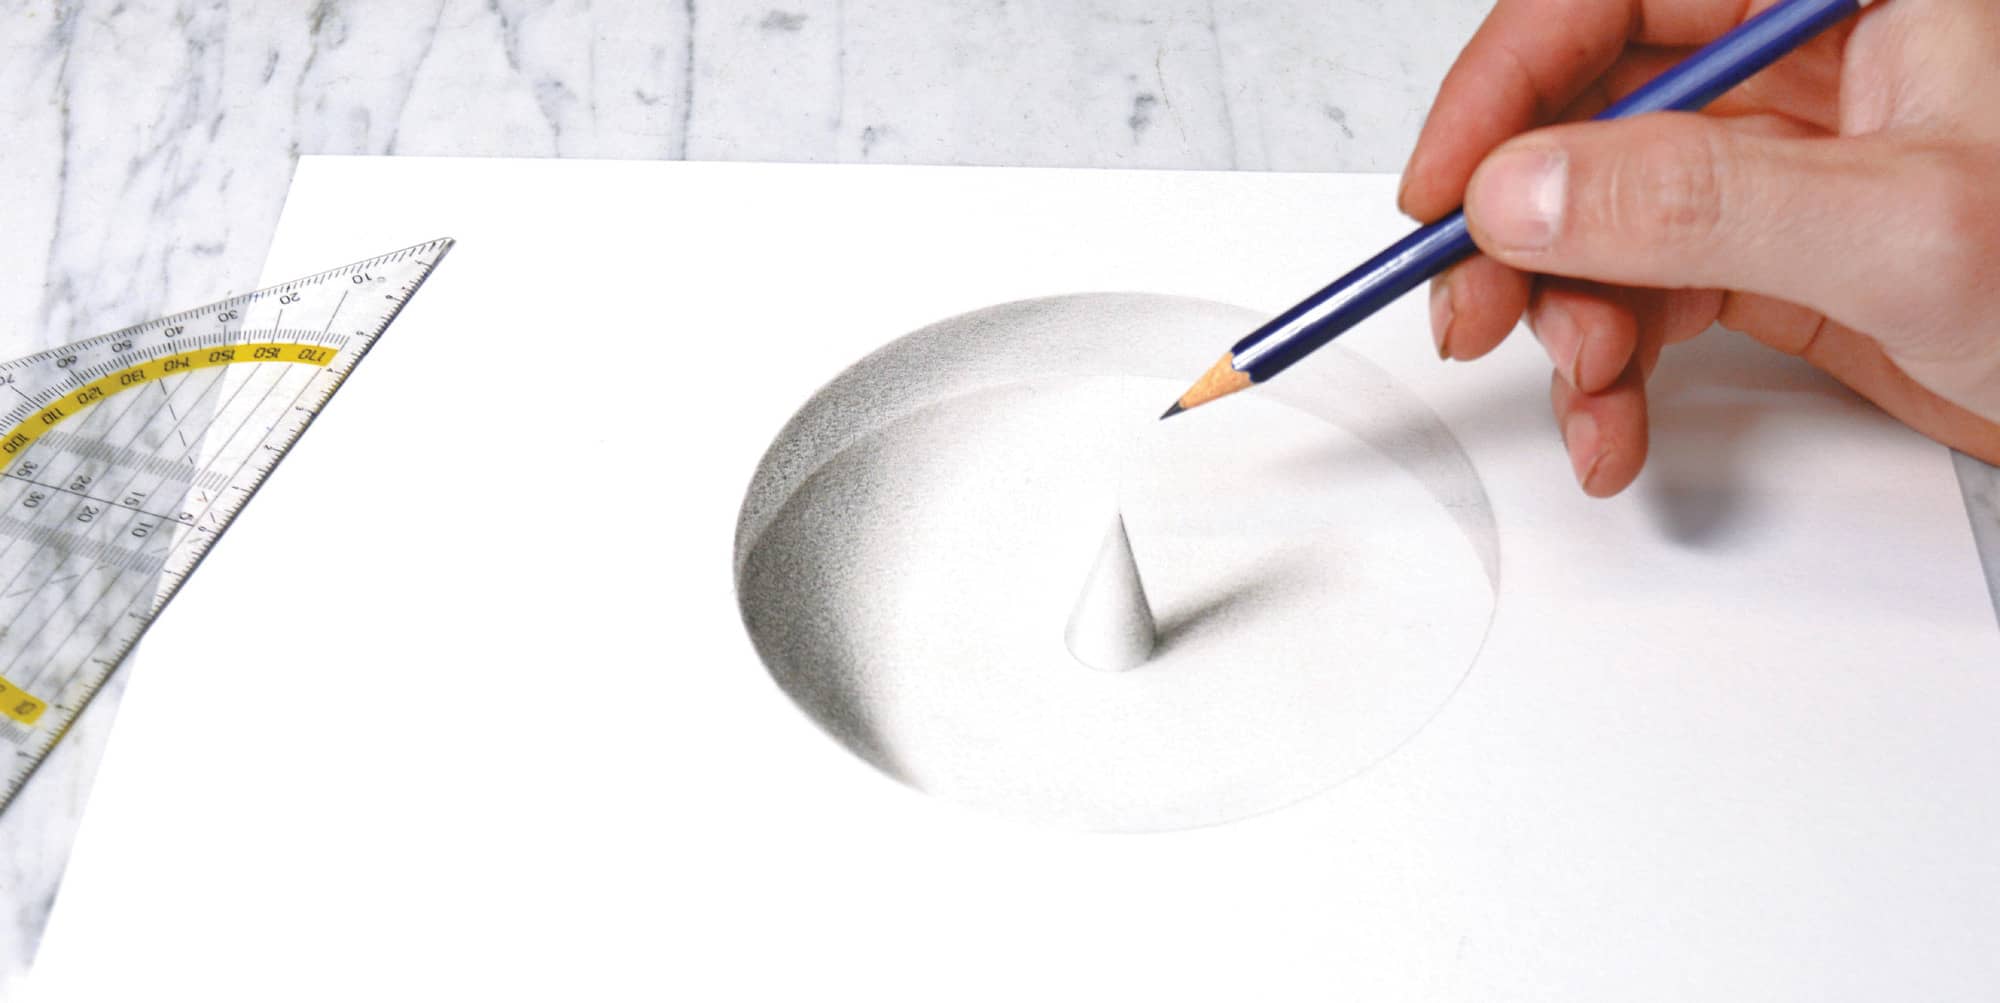 Splintering Reality: Optical Illusions in 3D Drawings